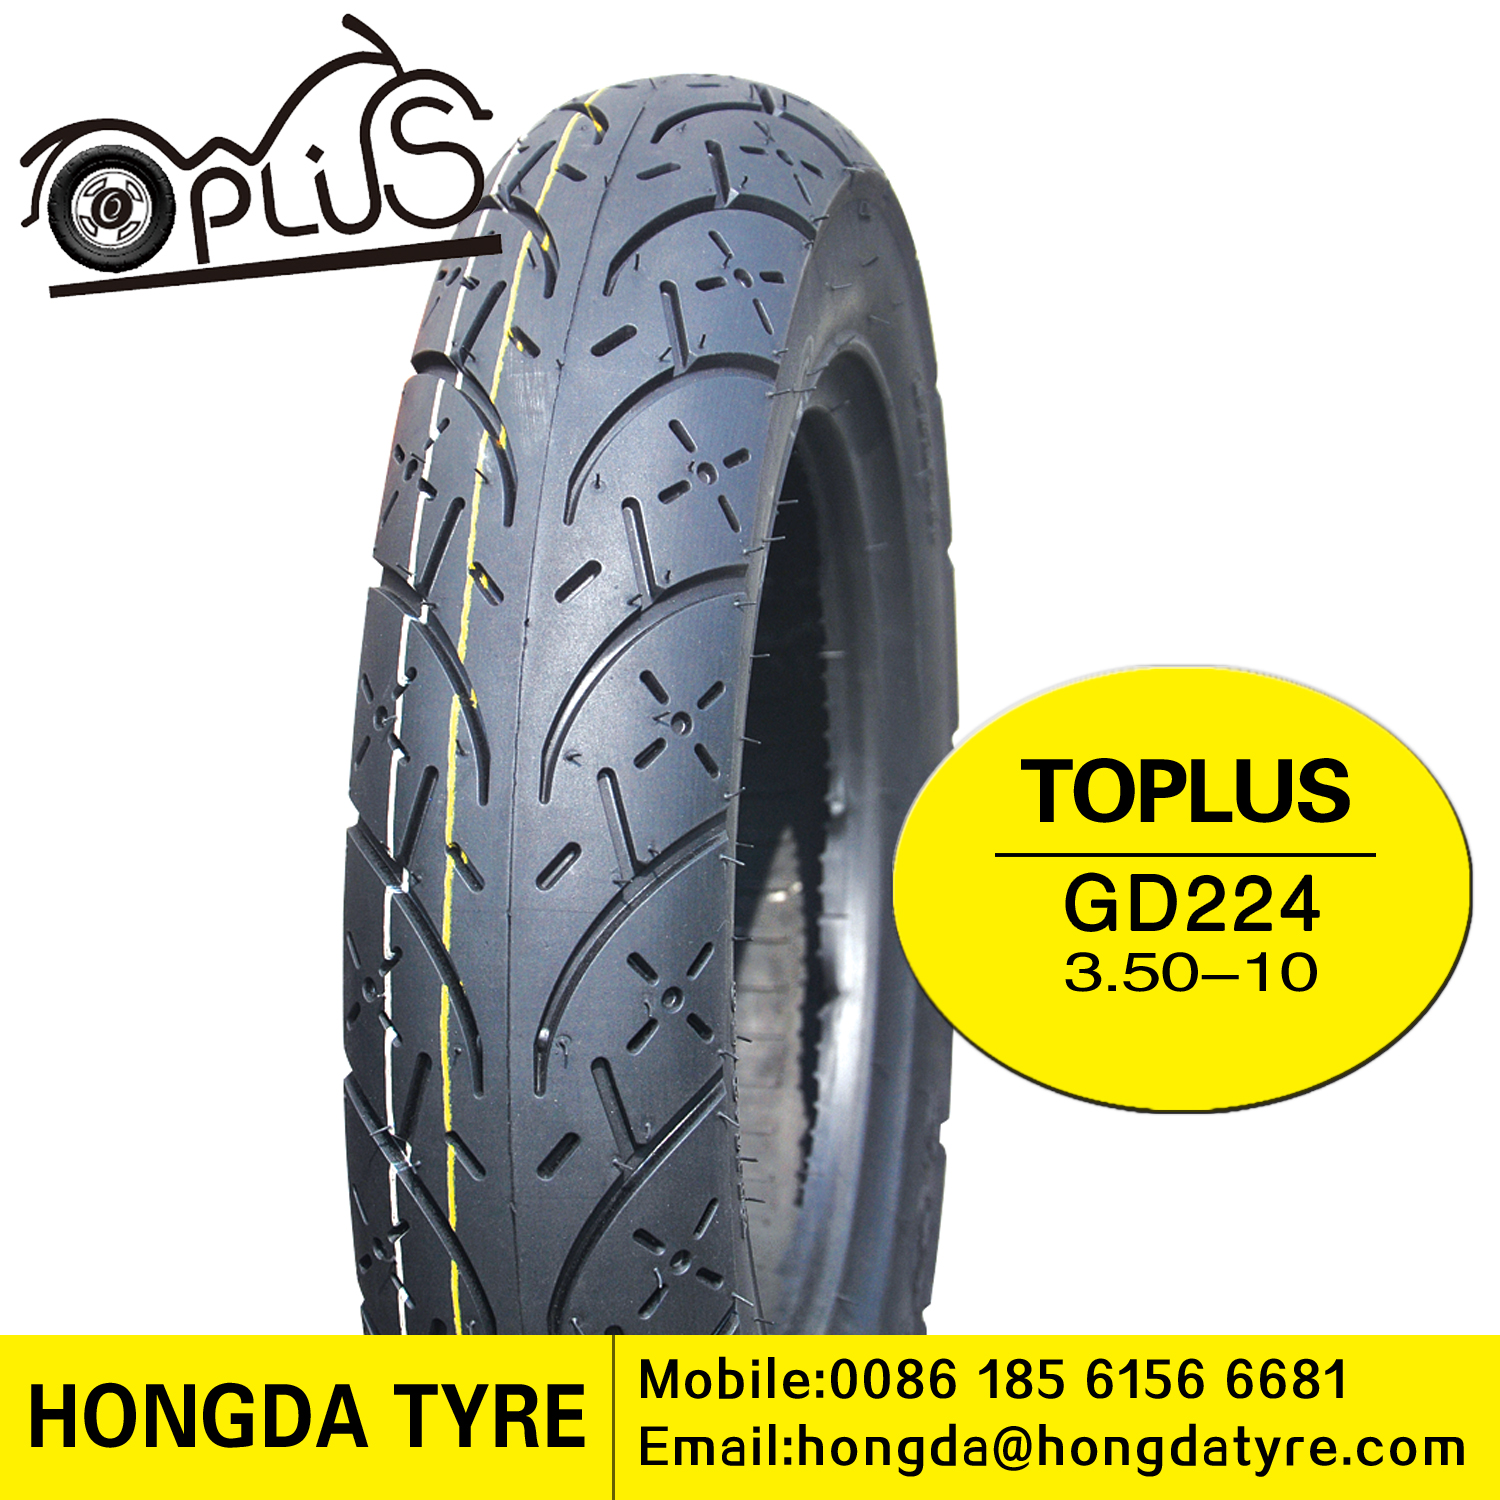 Motorcycle tyre GD224